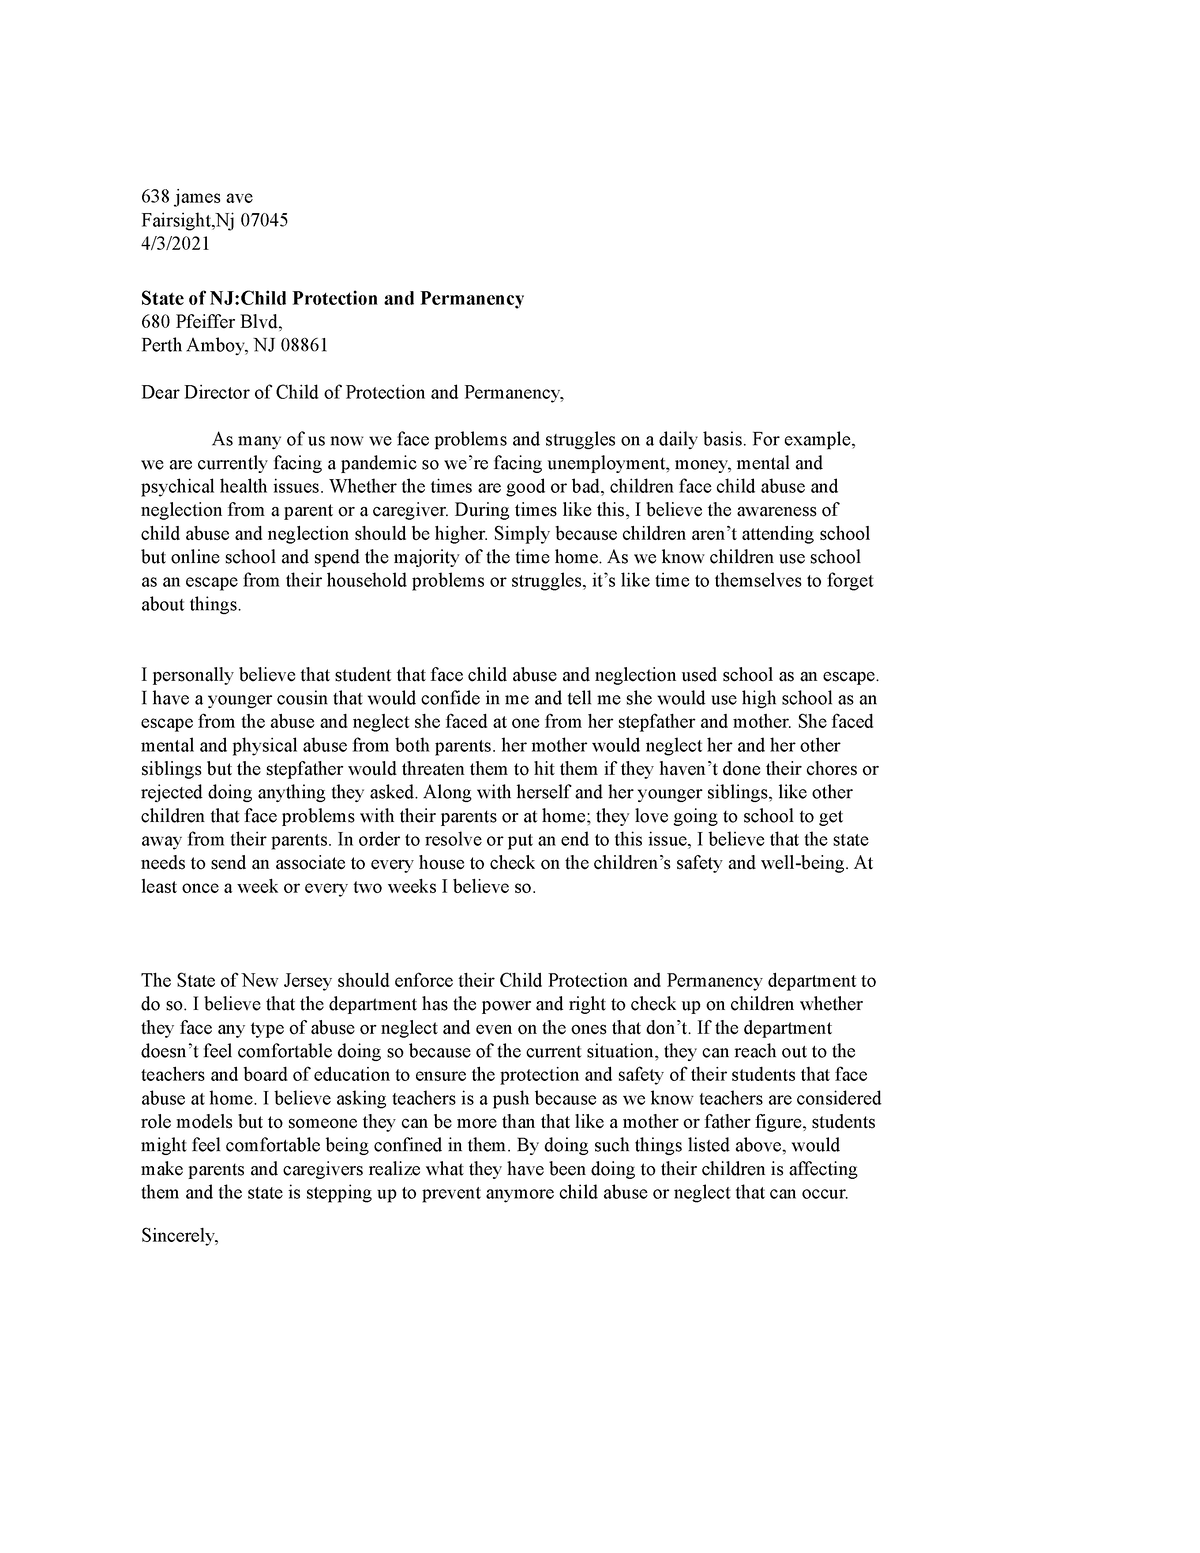 Letter to Child Advocacy office - 638 james ave Fairsight,Nj 07045 4/3 ...